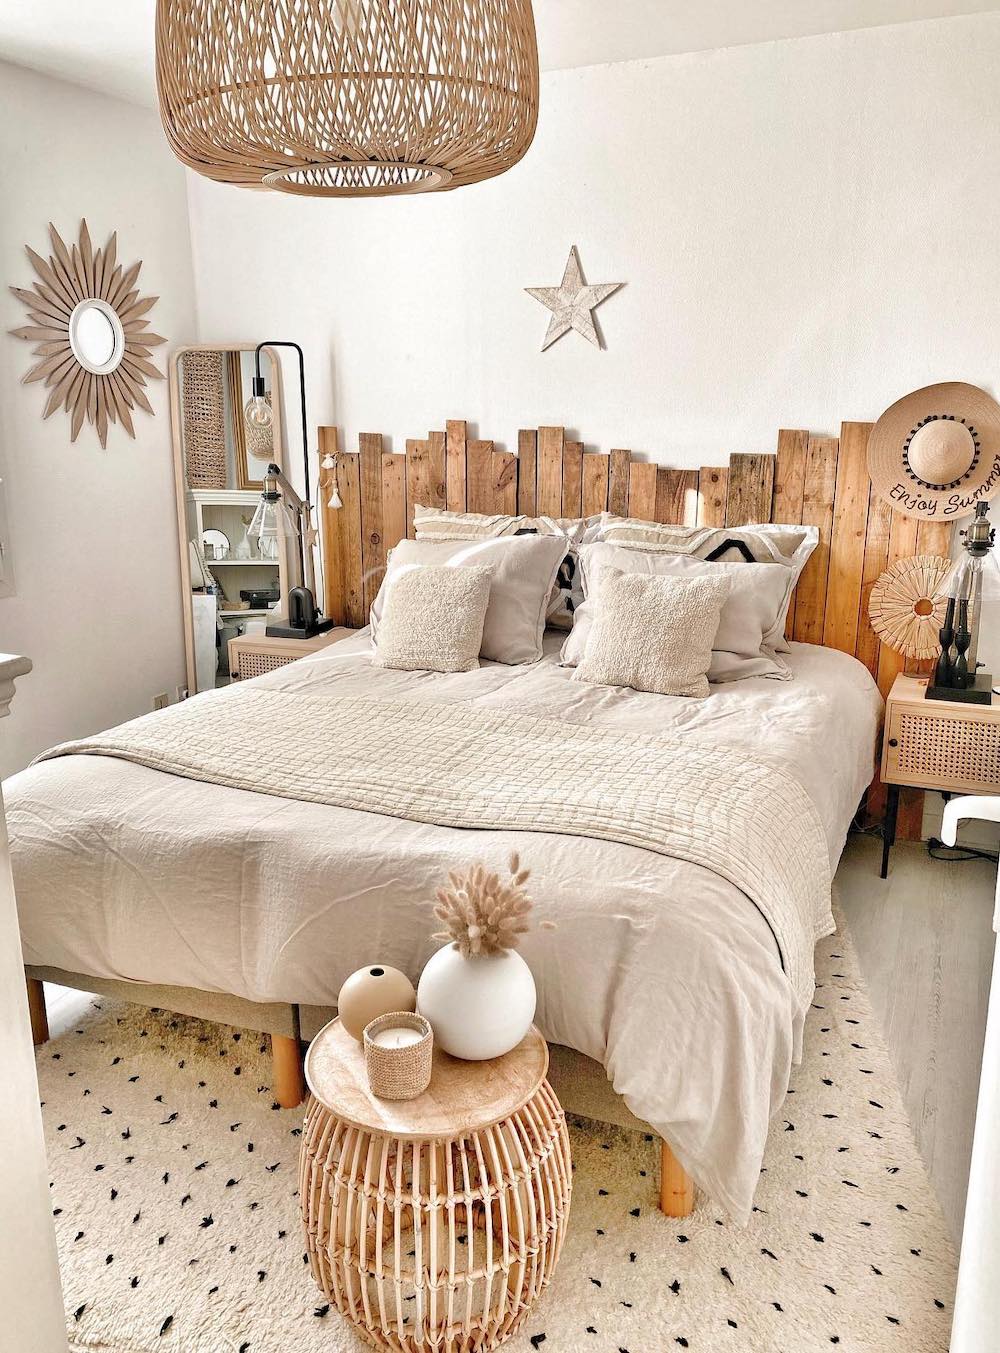 a rustic bohemian style bedroom with a reclaimed wood headboard and other natural elements